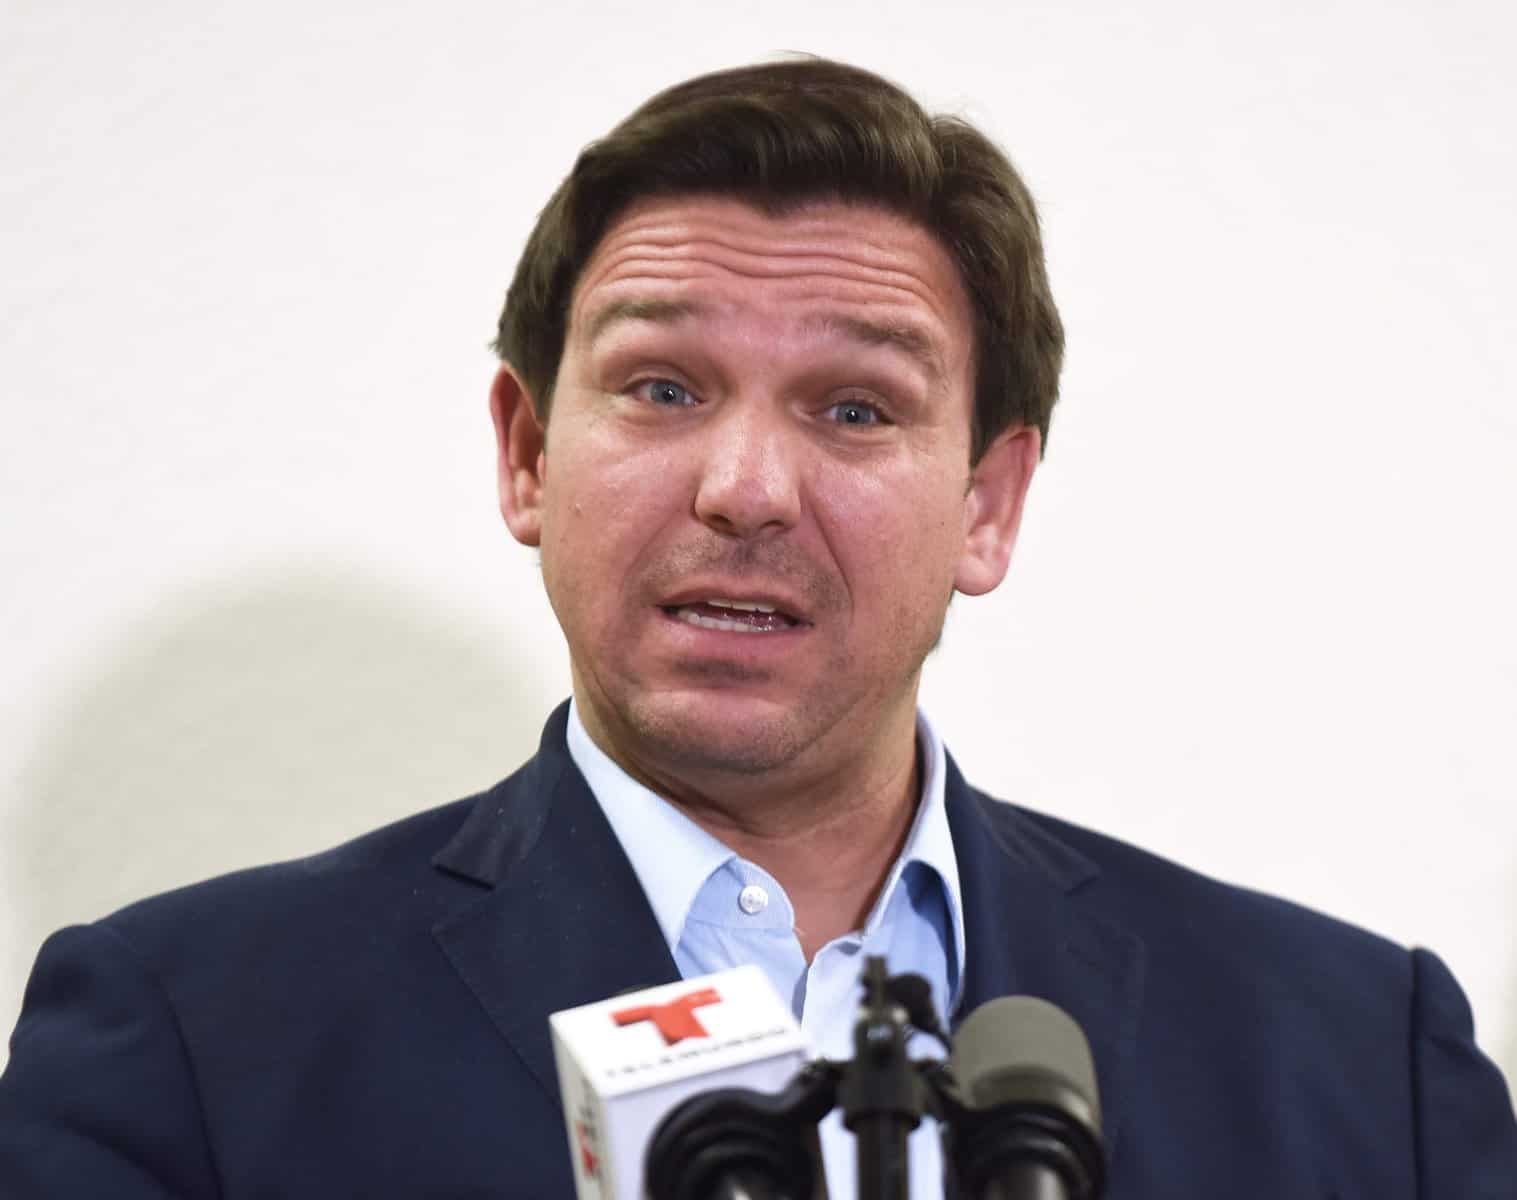 2021 08 21T152407Z 733248315 MT1SIPA000C9CTEM RTRMADP 3 SIPA USA scaled Gov. Ron DeSantis has seen his Republican presidential campaign flatline, and he is refusing to confirm or deny that he is being flown to campaign events by a wealthy supporter.